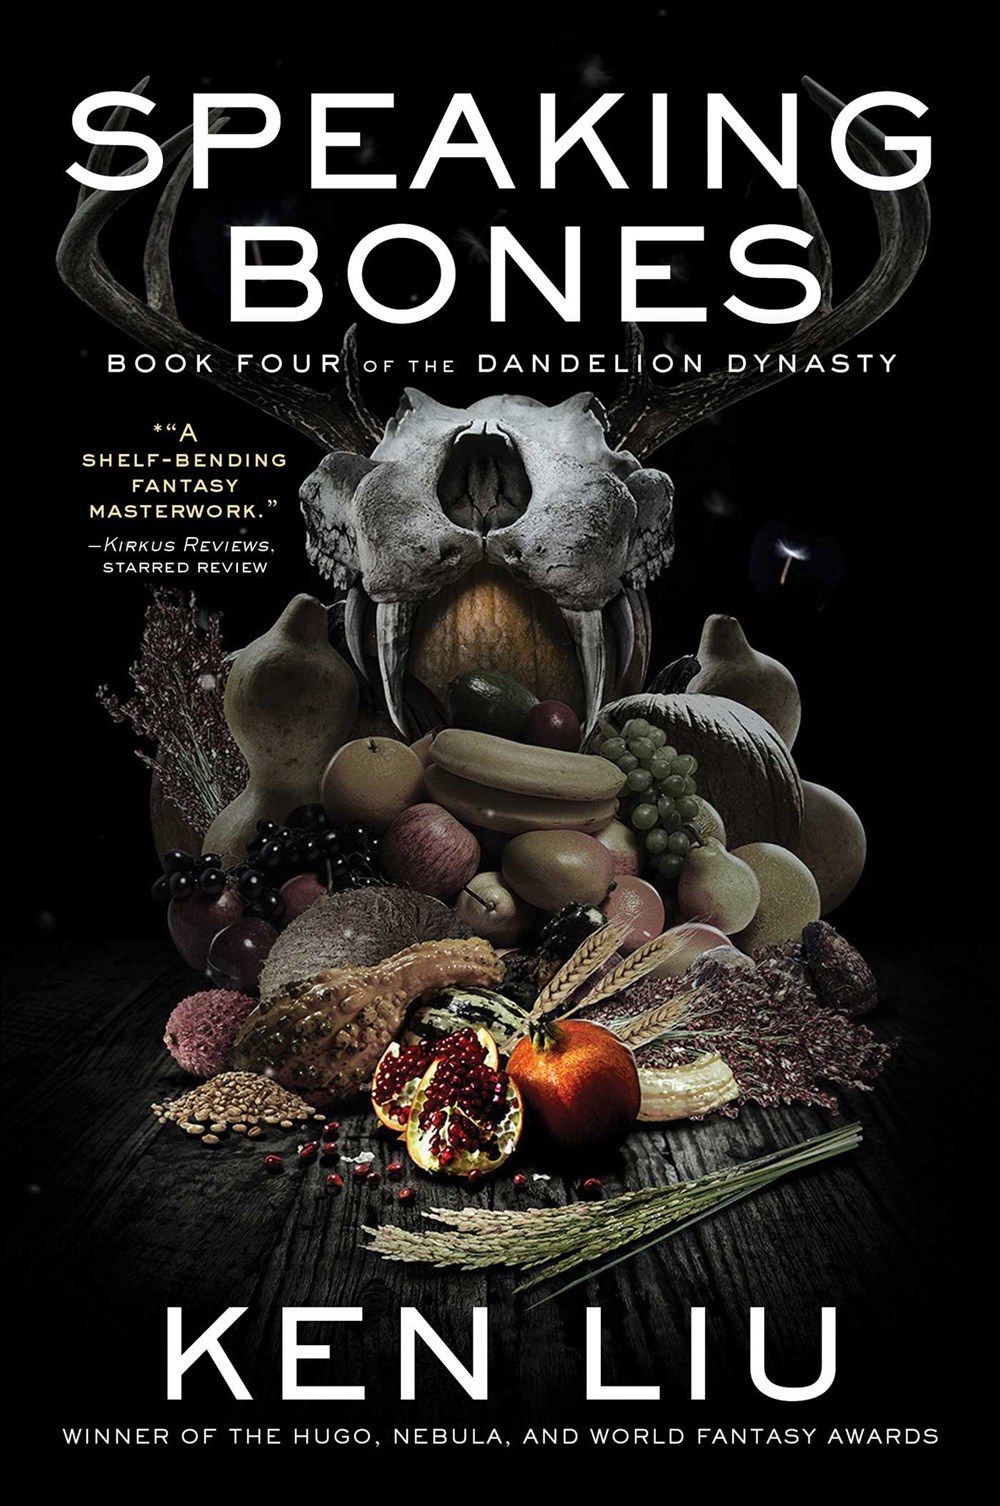 The cover of Speaking Bones by Ken Liu with a cornucopia in front of a garina fin skull.